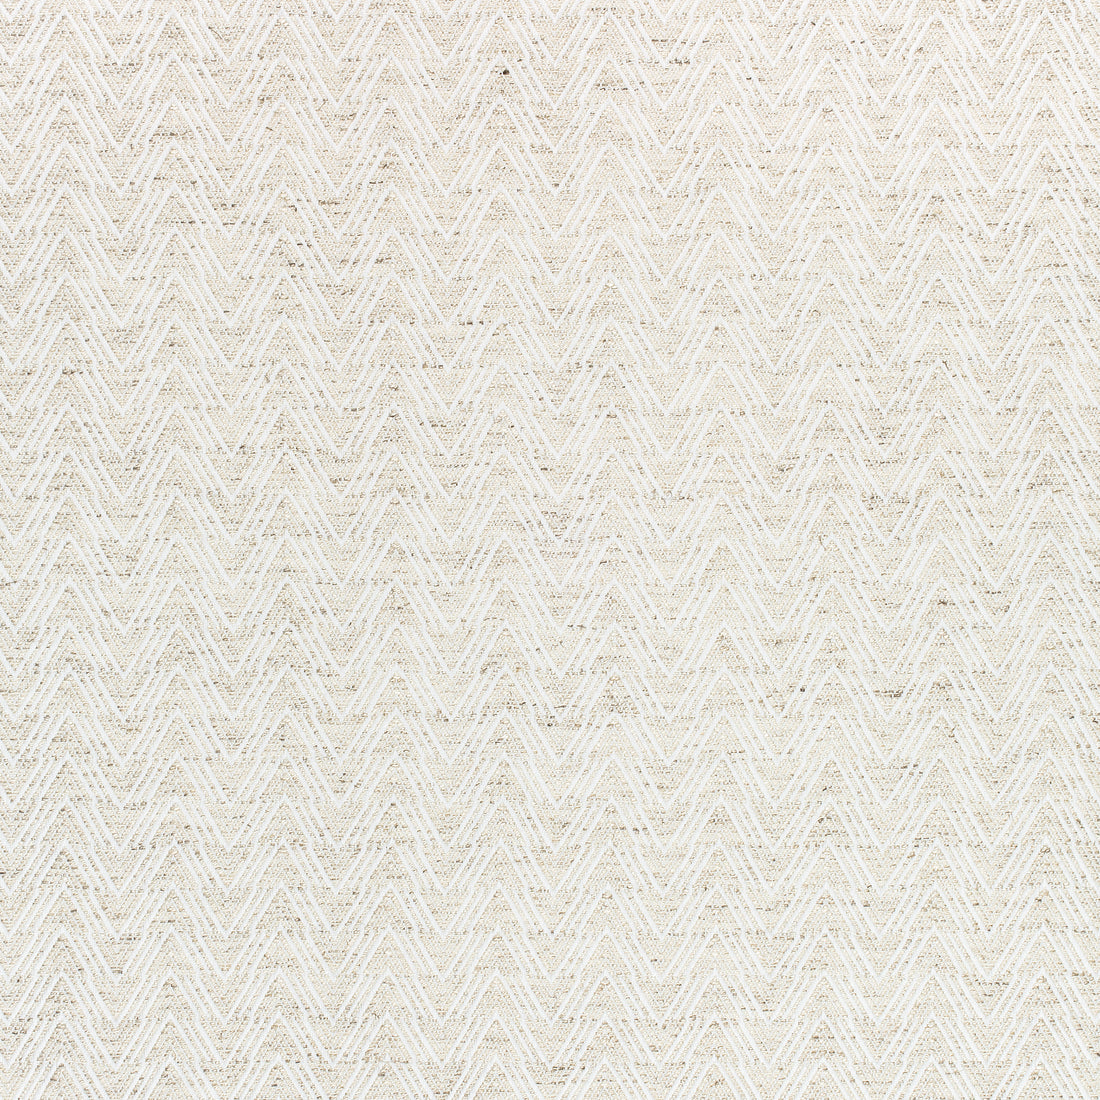 Gatsby fabric in flax color - pattern number W80647 - by Thibaut in the Pinnacle collection